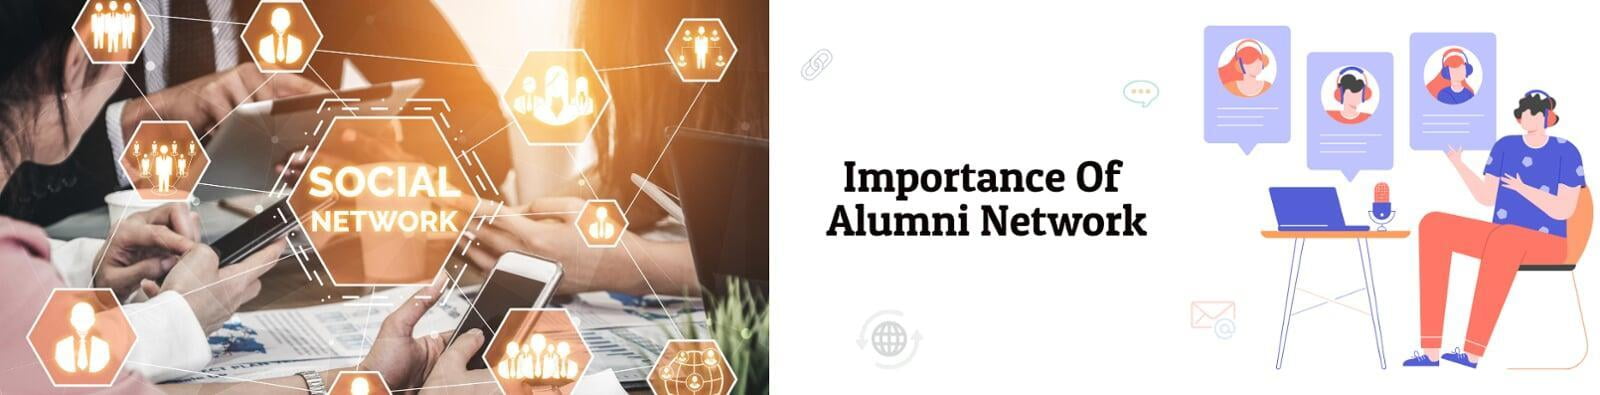 National Centre for Excellence - Importance of Alumni Network